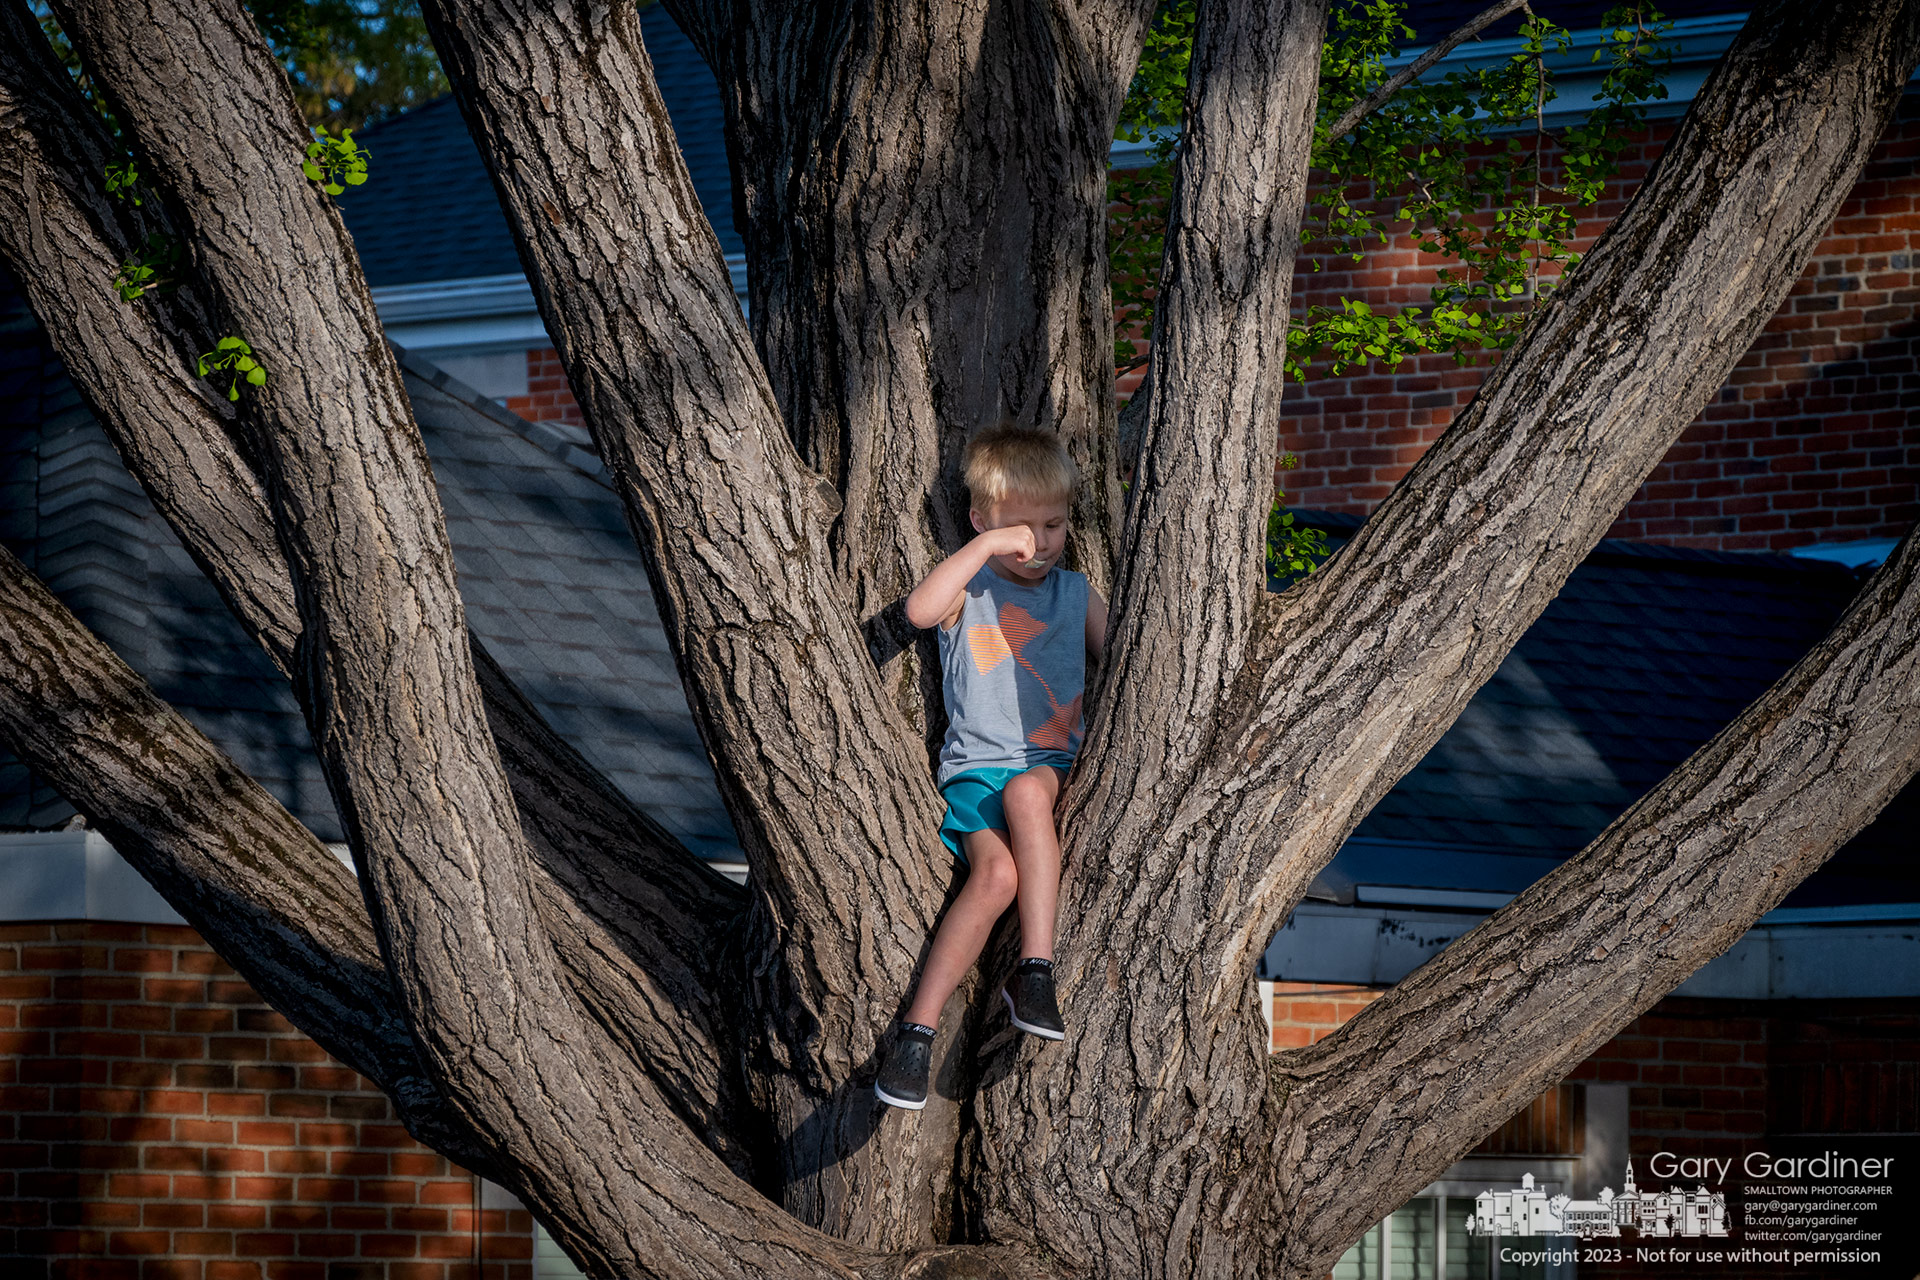 A young boy enjoys Graeter's ice cream in the branching crooks of the ginkgo tree at city hall where his father lifted him on their walk Uptown Friday night. My Final Photo for May 5, 2023.